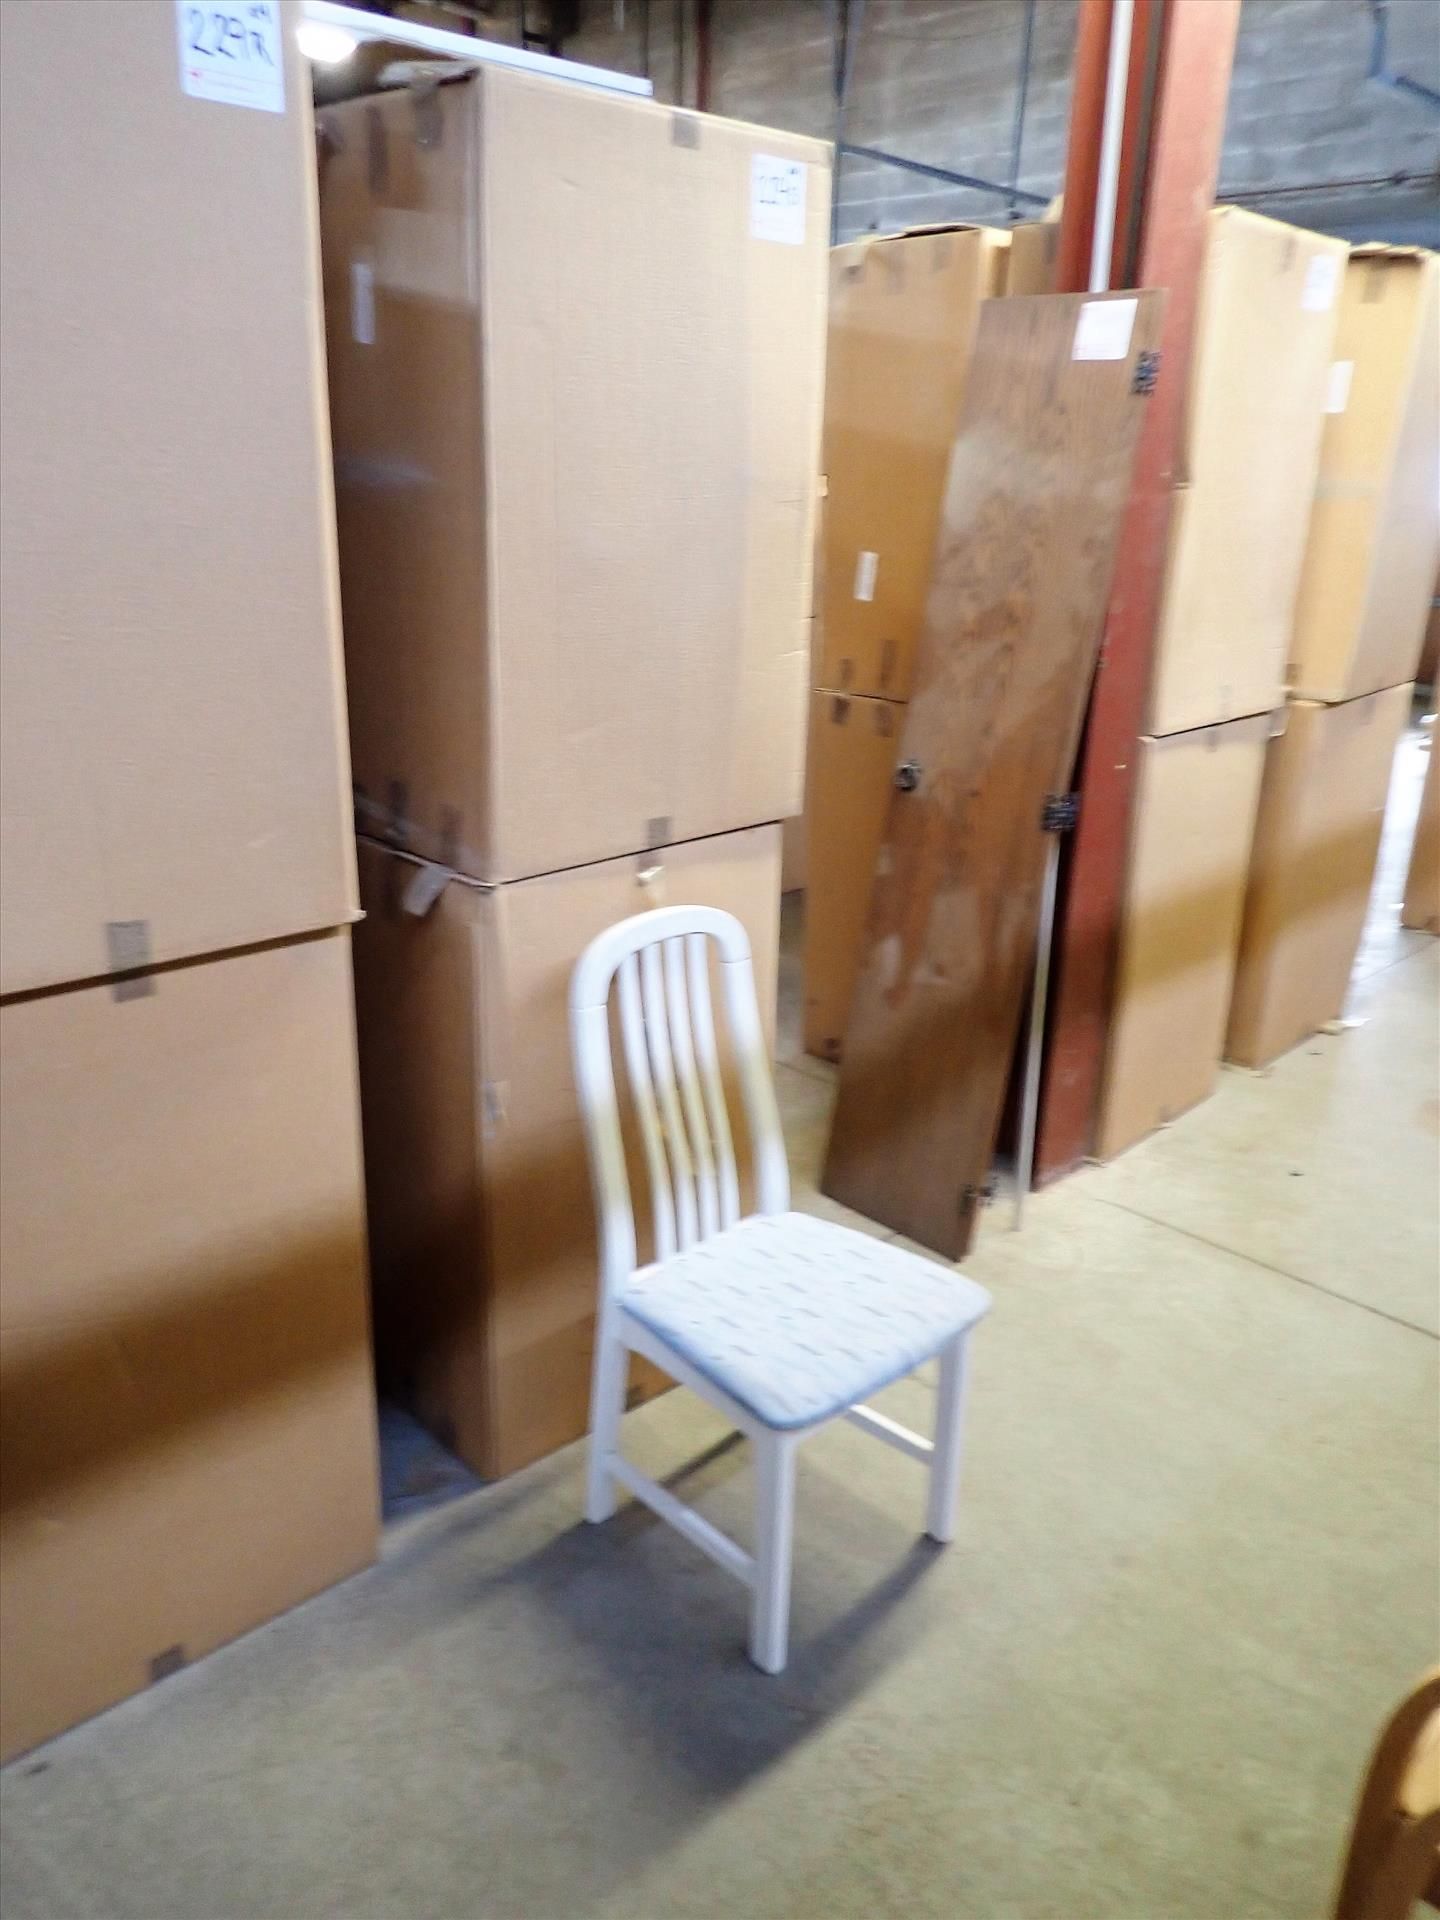 (4) Koln dinning chairs (NEW in box), white lacquered finish, stain-resistant commercial-grade - Image 2 of 2